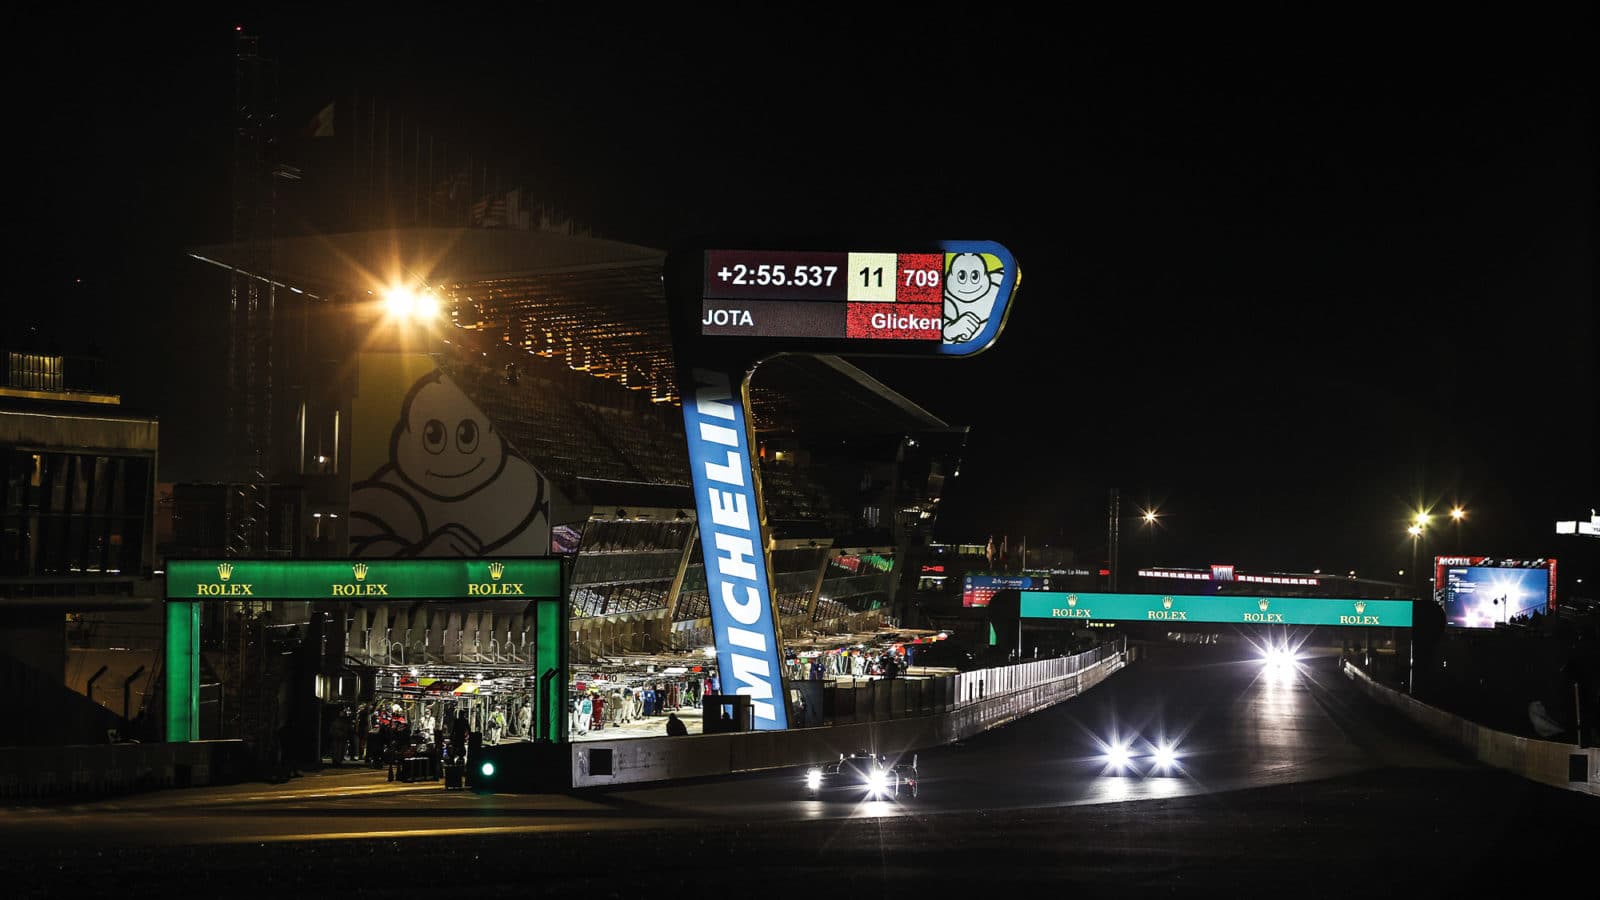 Night photo at Le Mans start finish straight in 2021